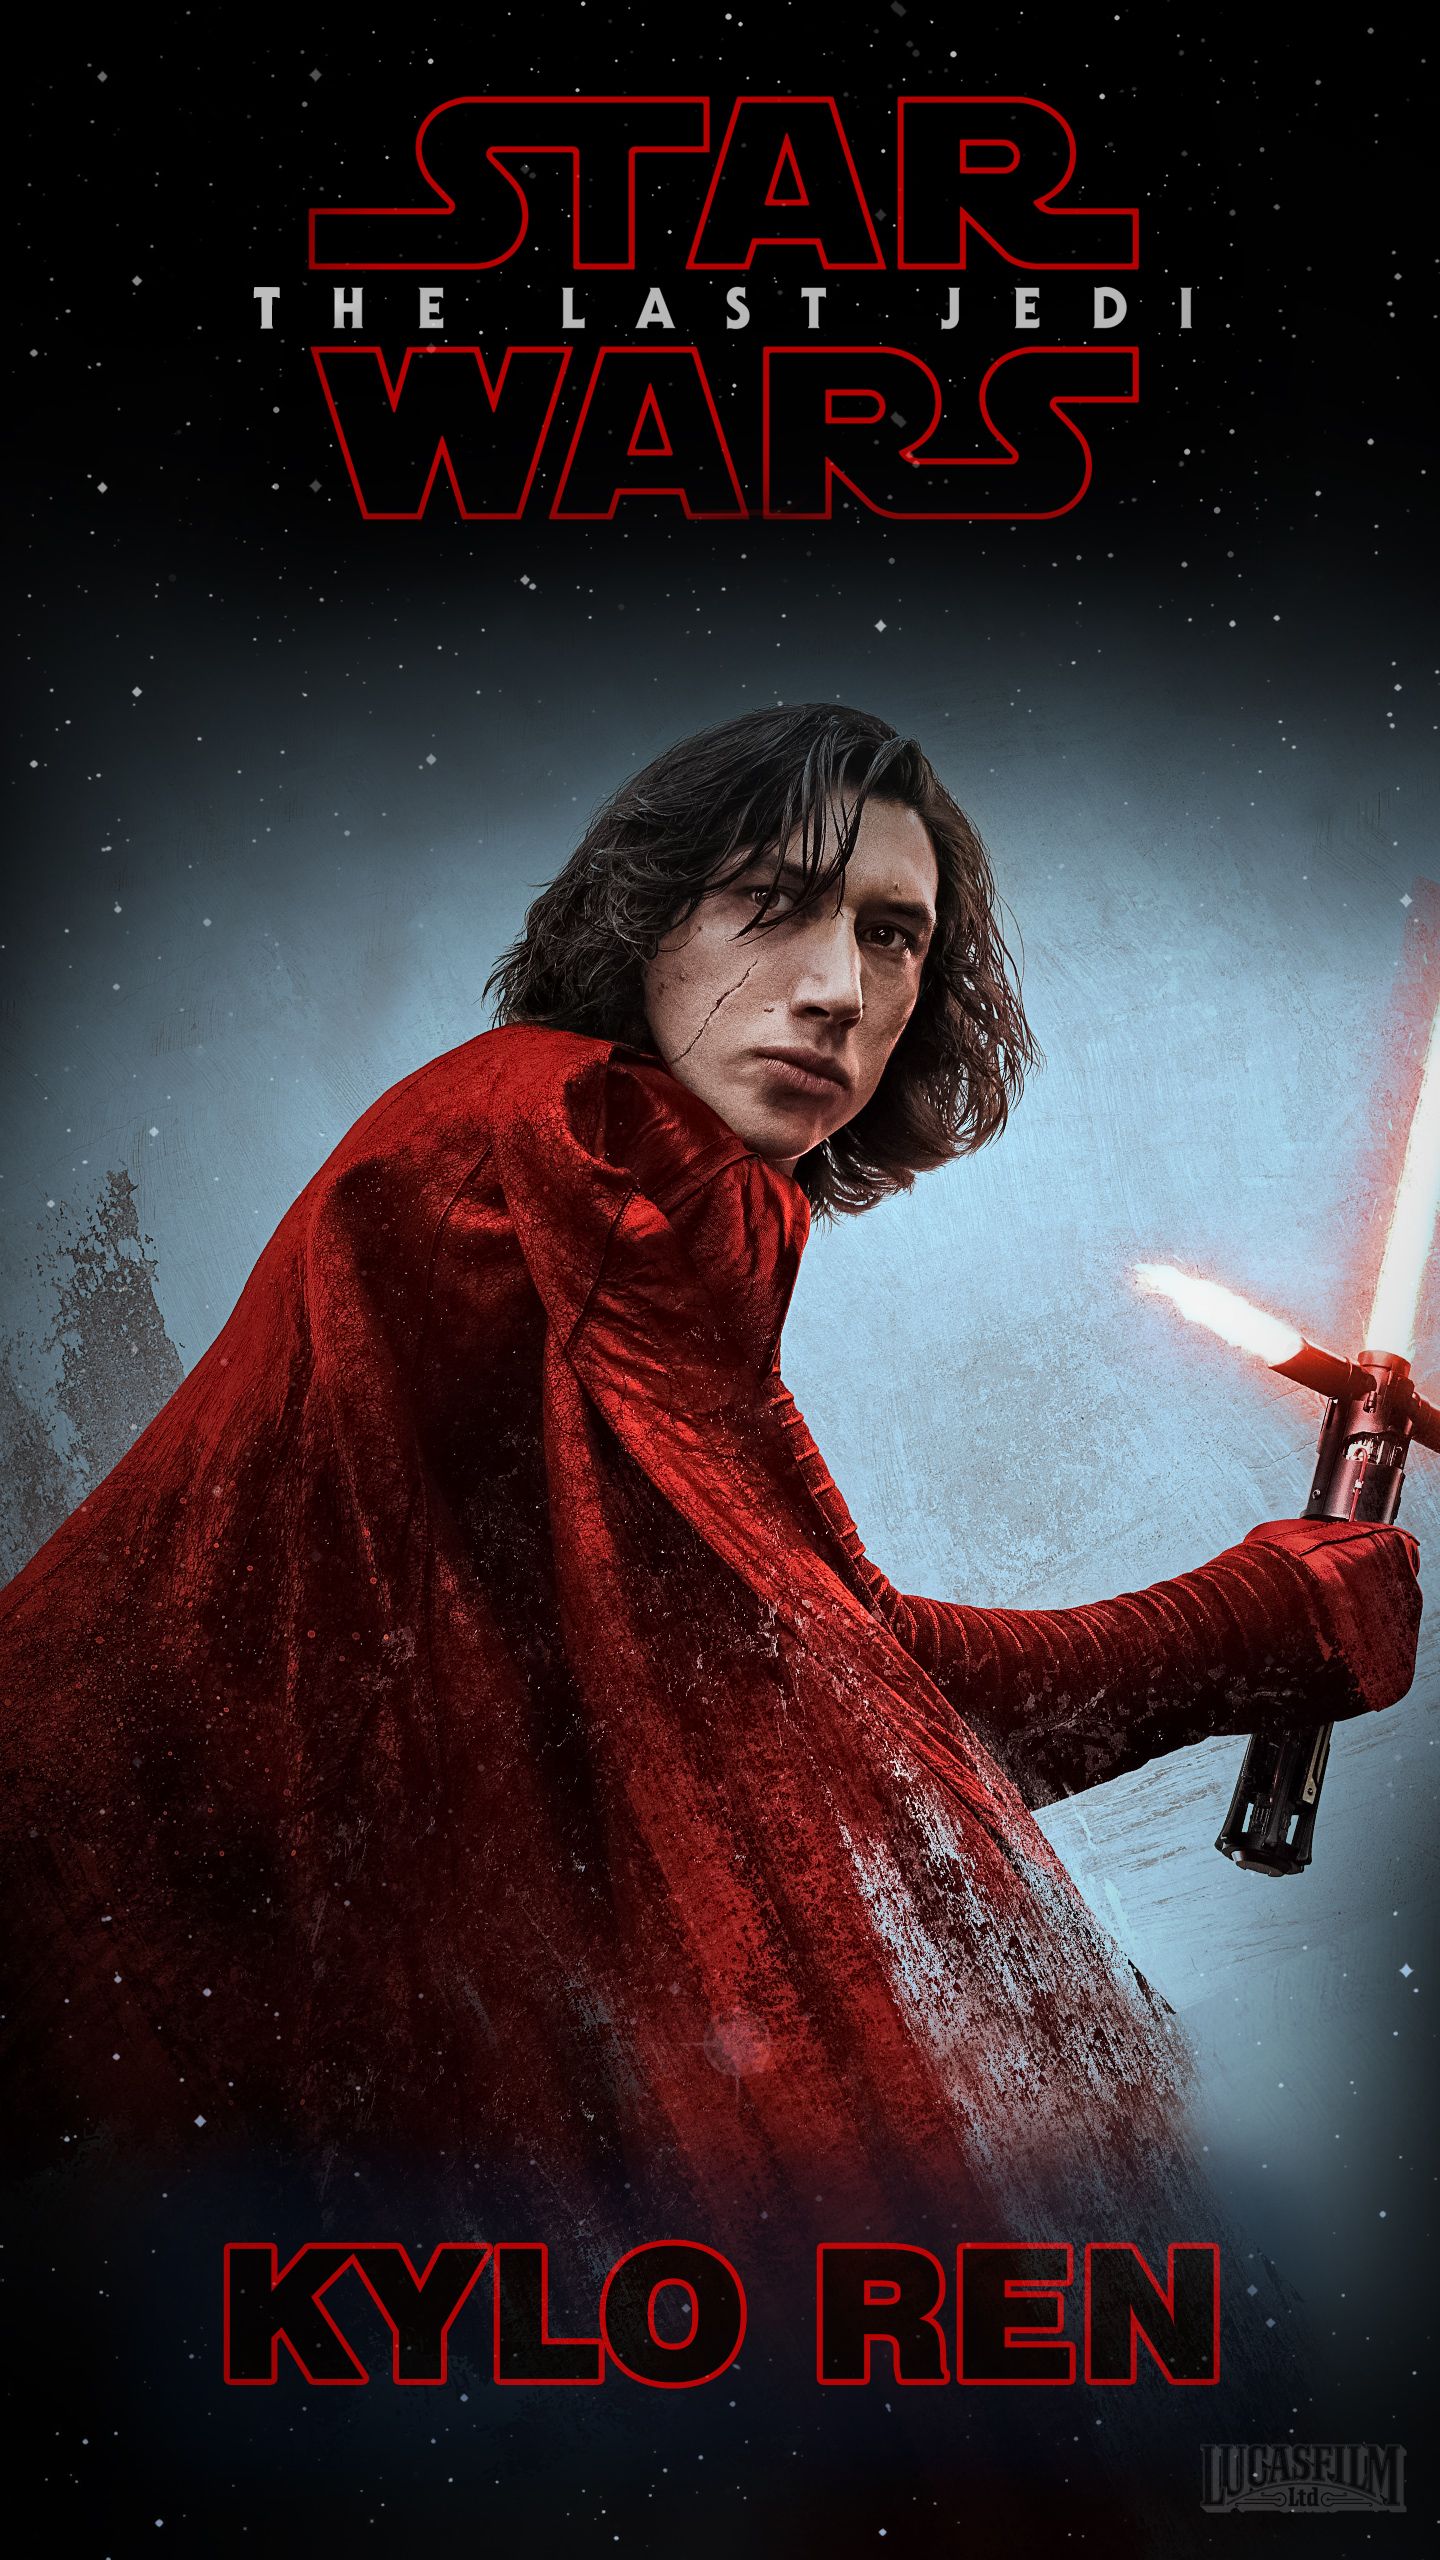 Star Wars The Last Jedi Kylo Ren Smartphone Wallpaper Quality Image And Transparent PNG Free Clipart